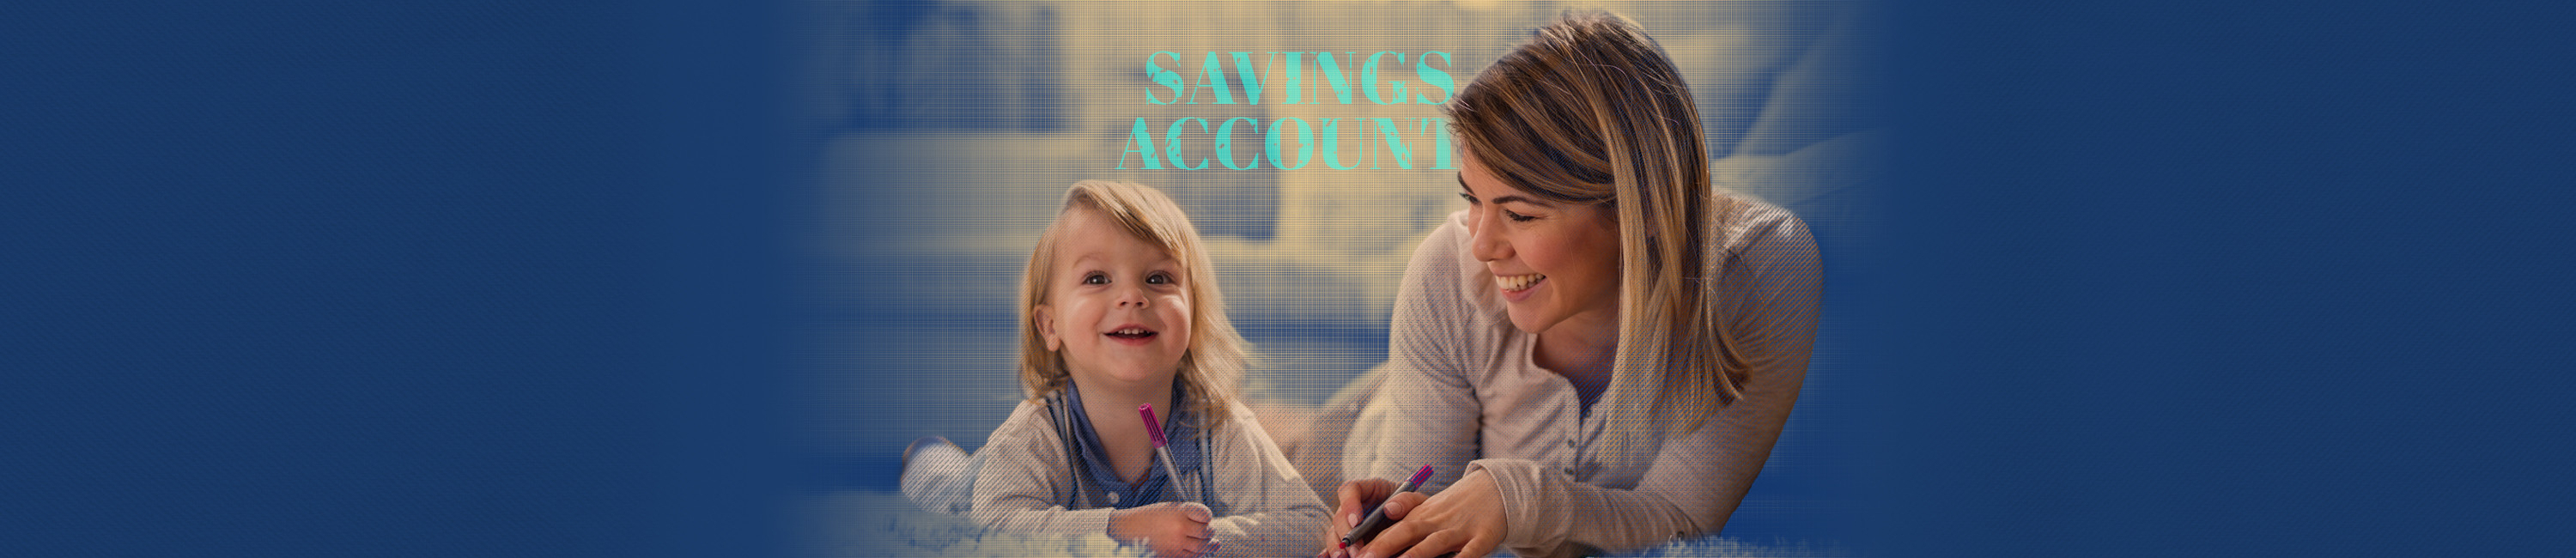 young girl smiling on the floor next to her mom who has ensured her daughter's future with a Fidelity Bank & Trust Savings account. Words on image say savings accounts